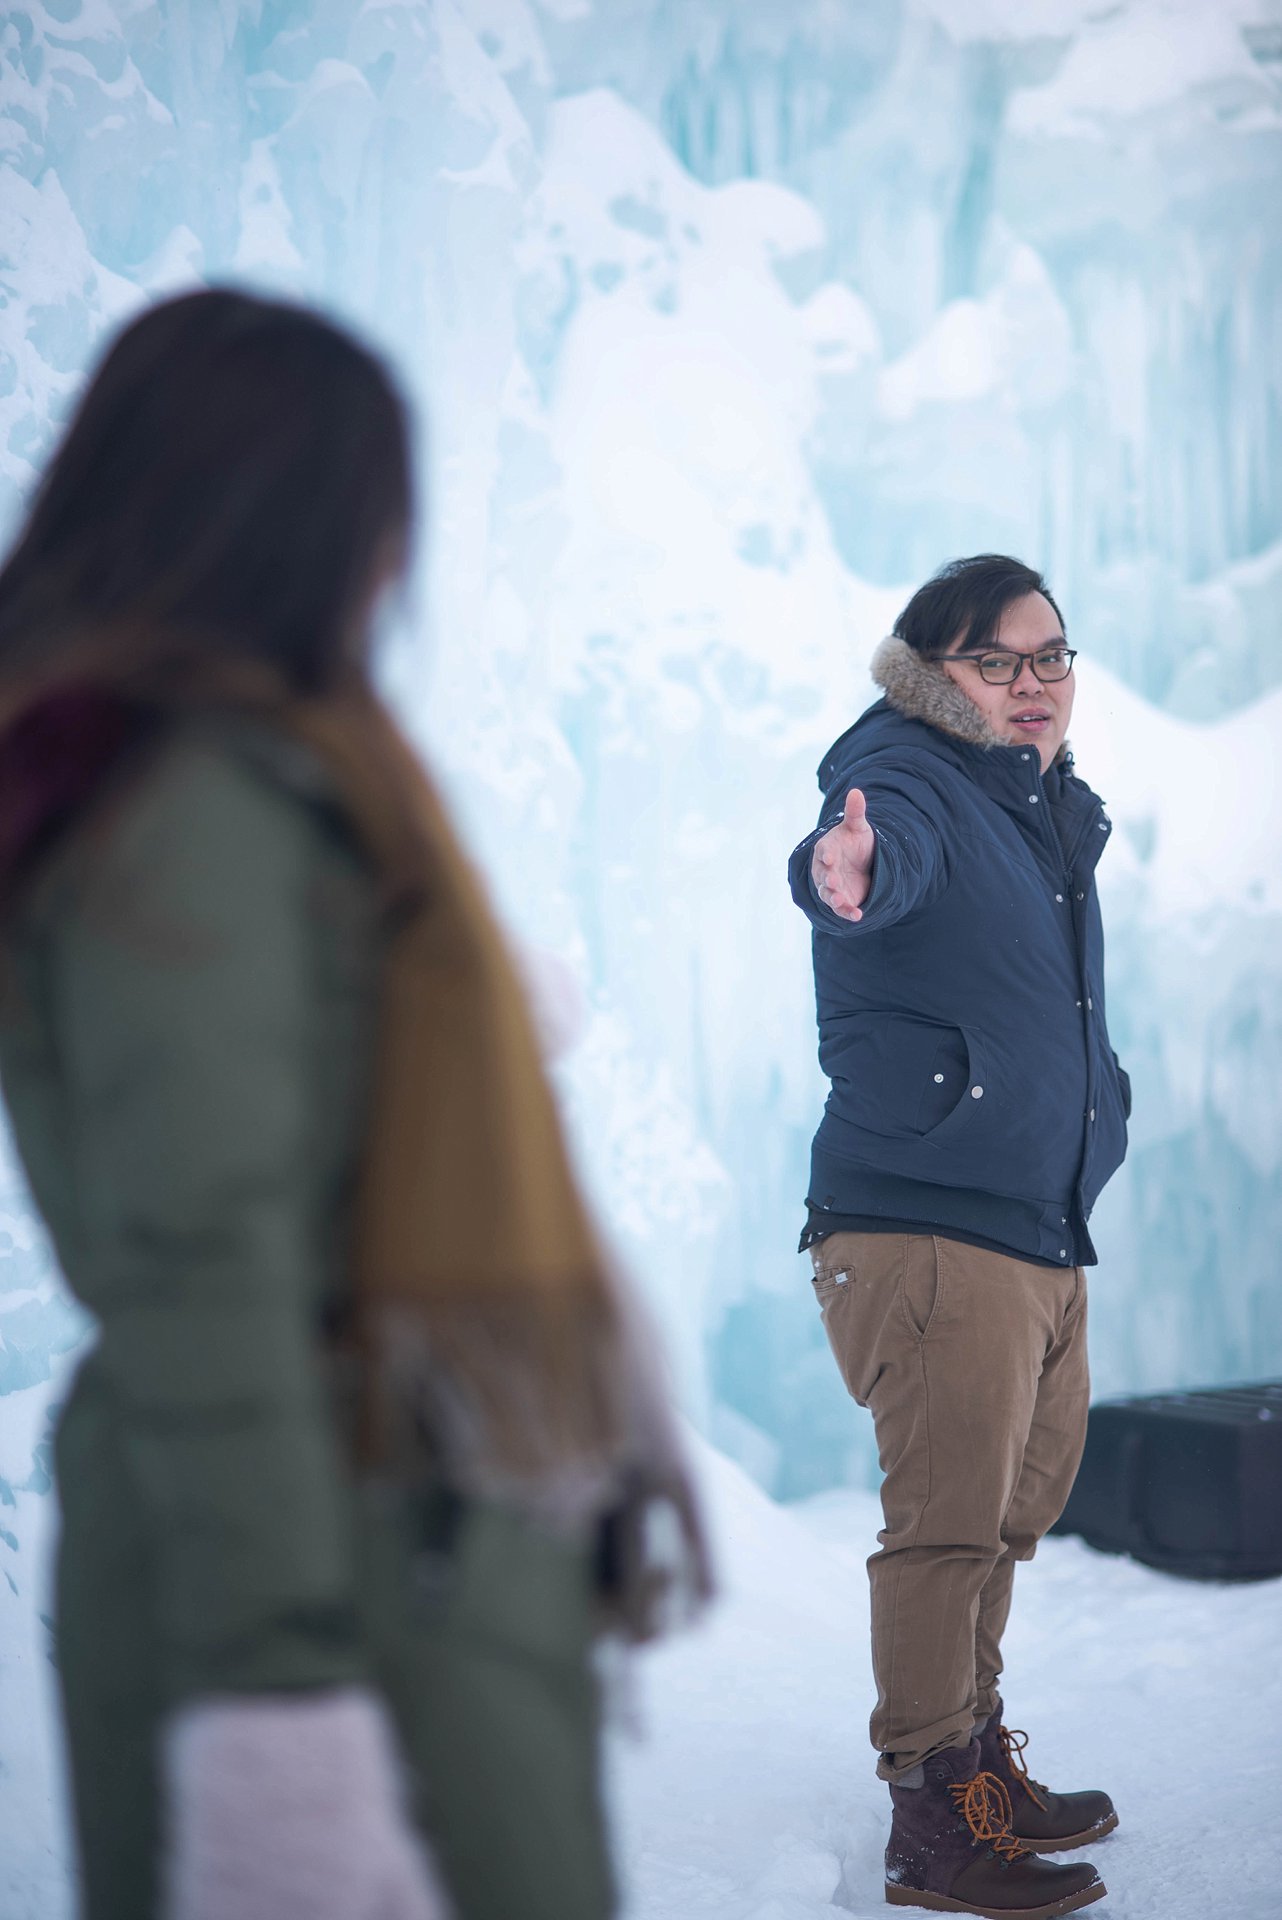 VJ-Ice-castles-engagement-photography_0003